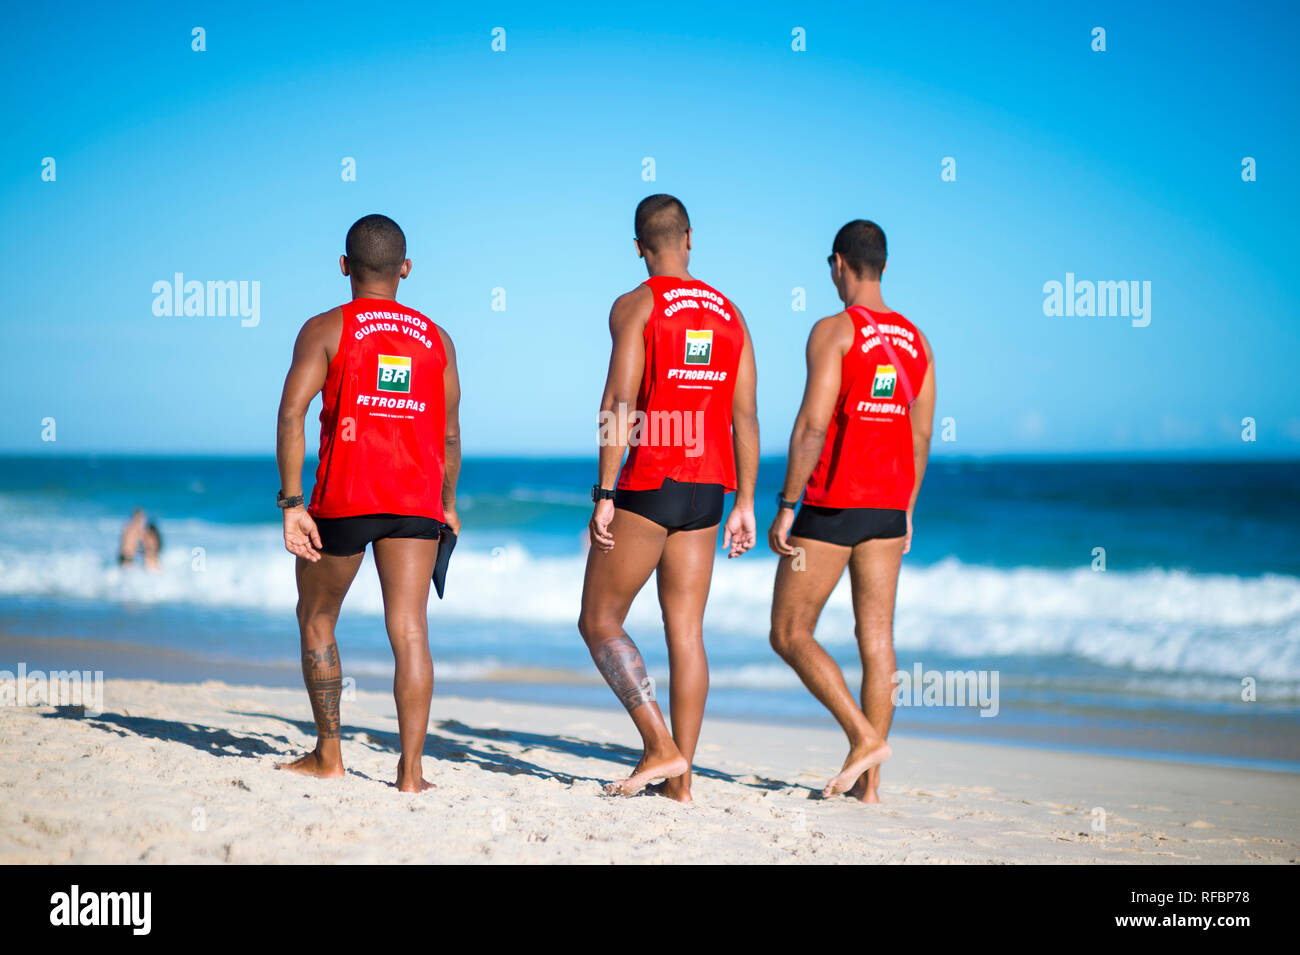 RIO DE JANEIRO - MARCH, 2018: Brazilian lifeguards in uniforms sponsored by the embattled oil company Petrobras monitor heavy surf on Ipanema Beach. Stock Photo